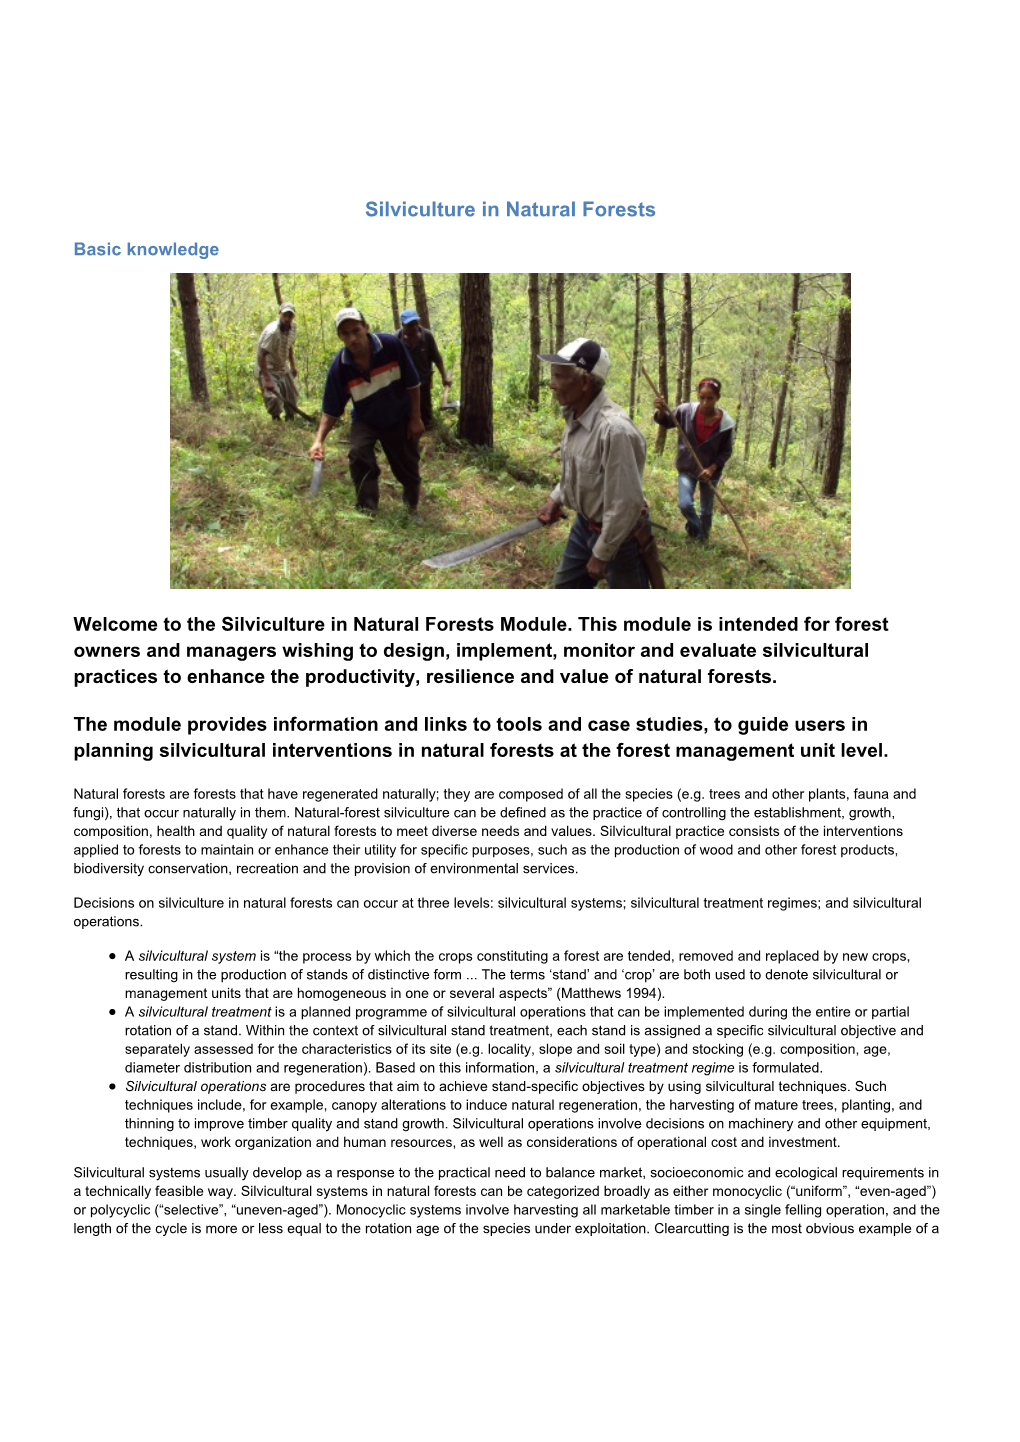 Silviculture in Natural Forests